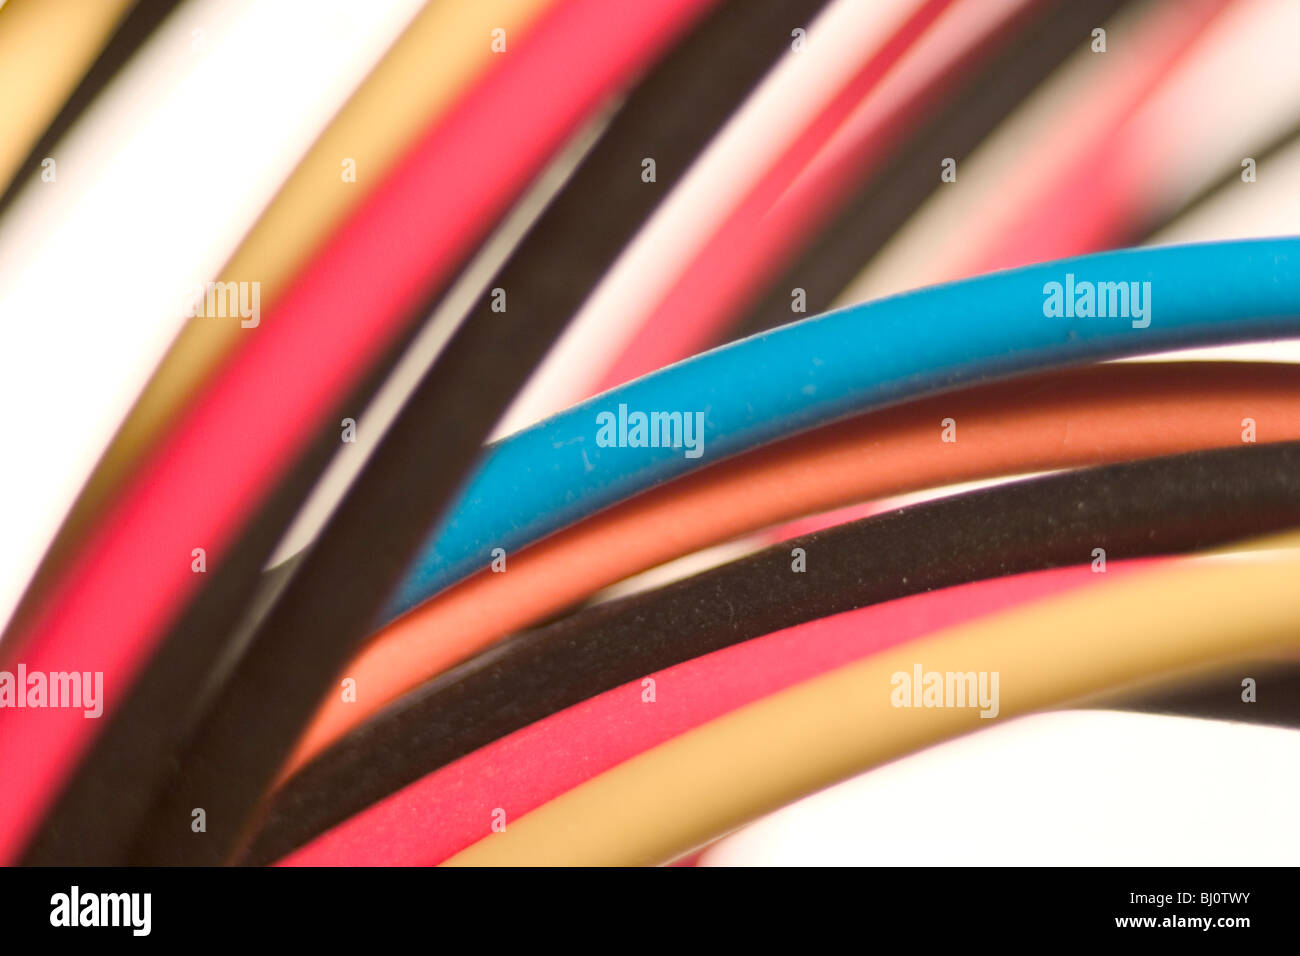 cut off cable Stock Photo